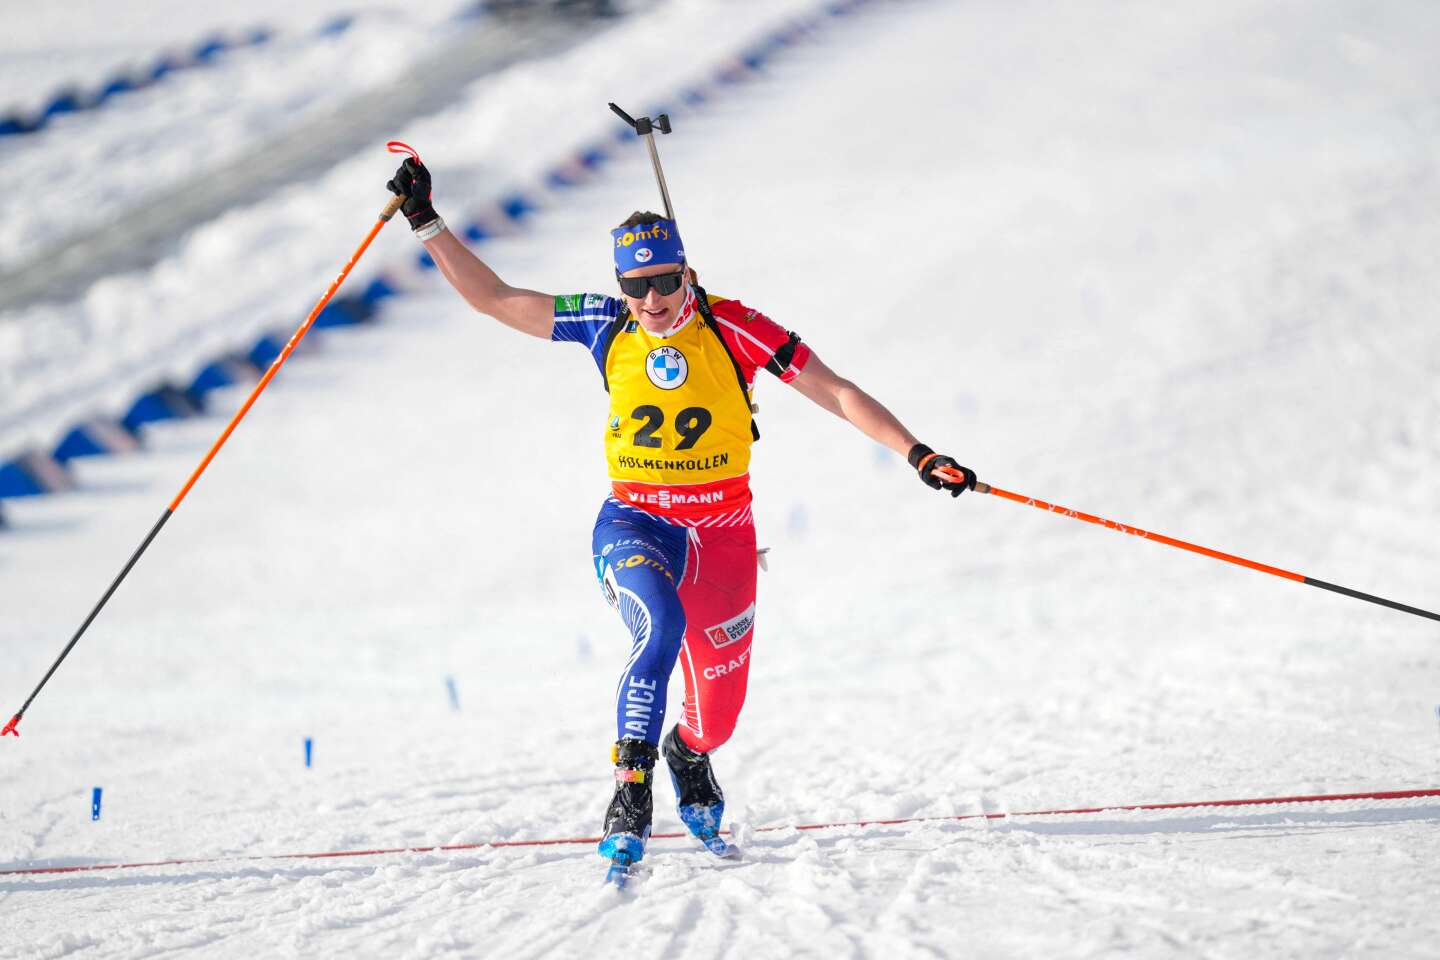 after the general classification, Julia Simon wins the small crystal globe of the mass start